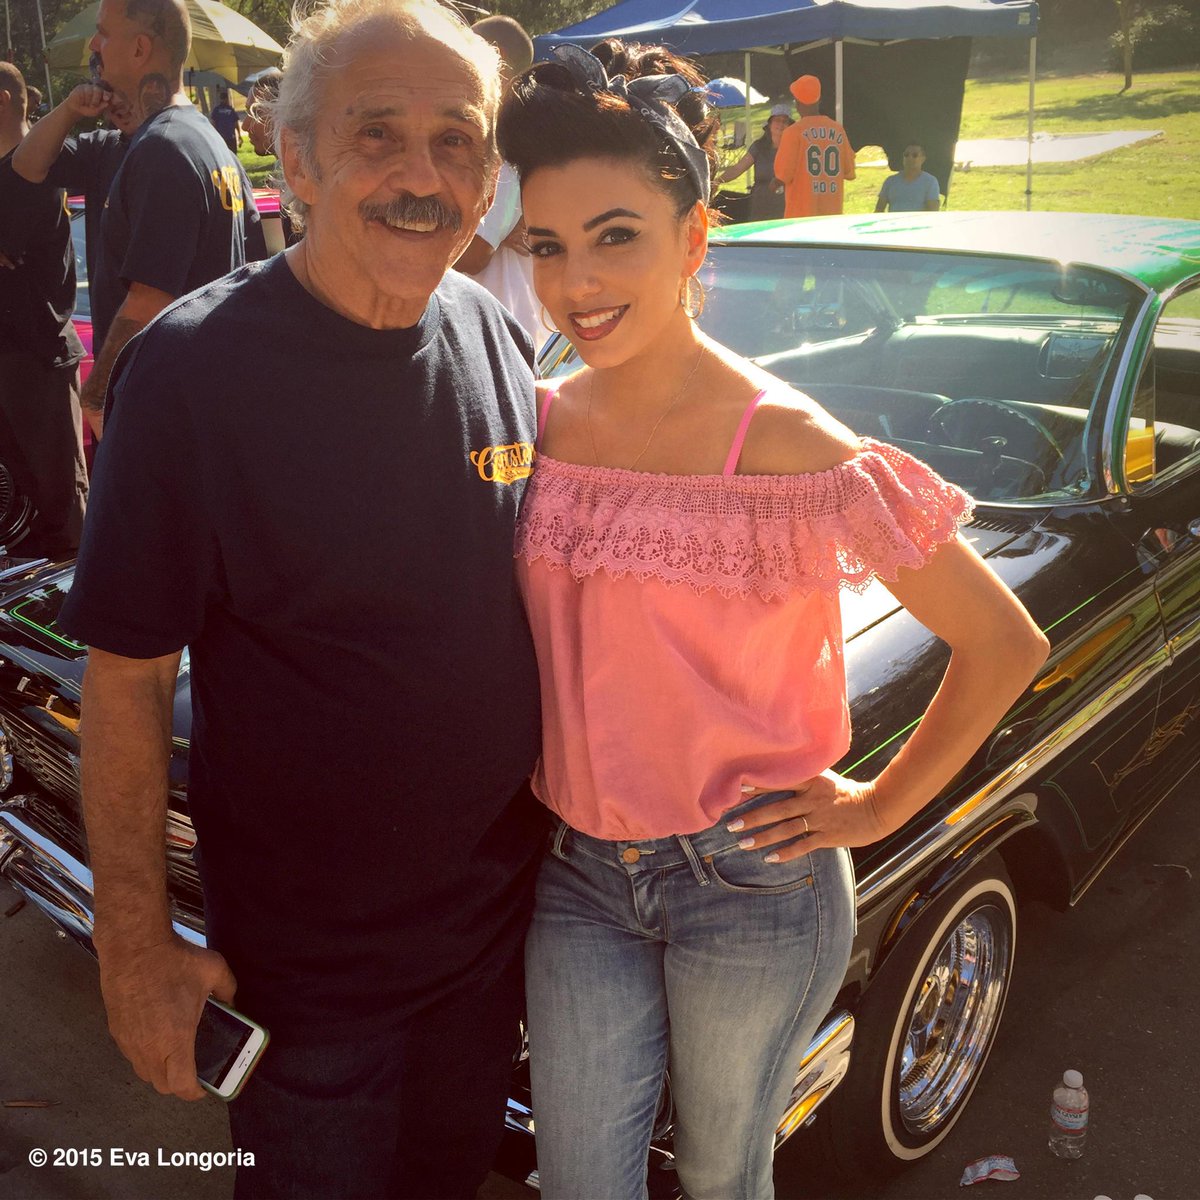 Me and the infamous Pepe Serna! #CorpusChristi  is representing! #Lowrider #LatinoPride http://t.co/2FY3vCOjFz